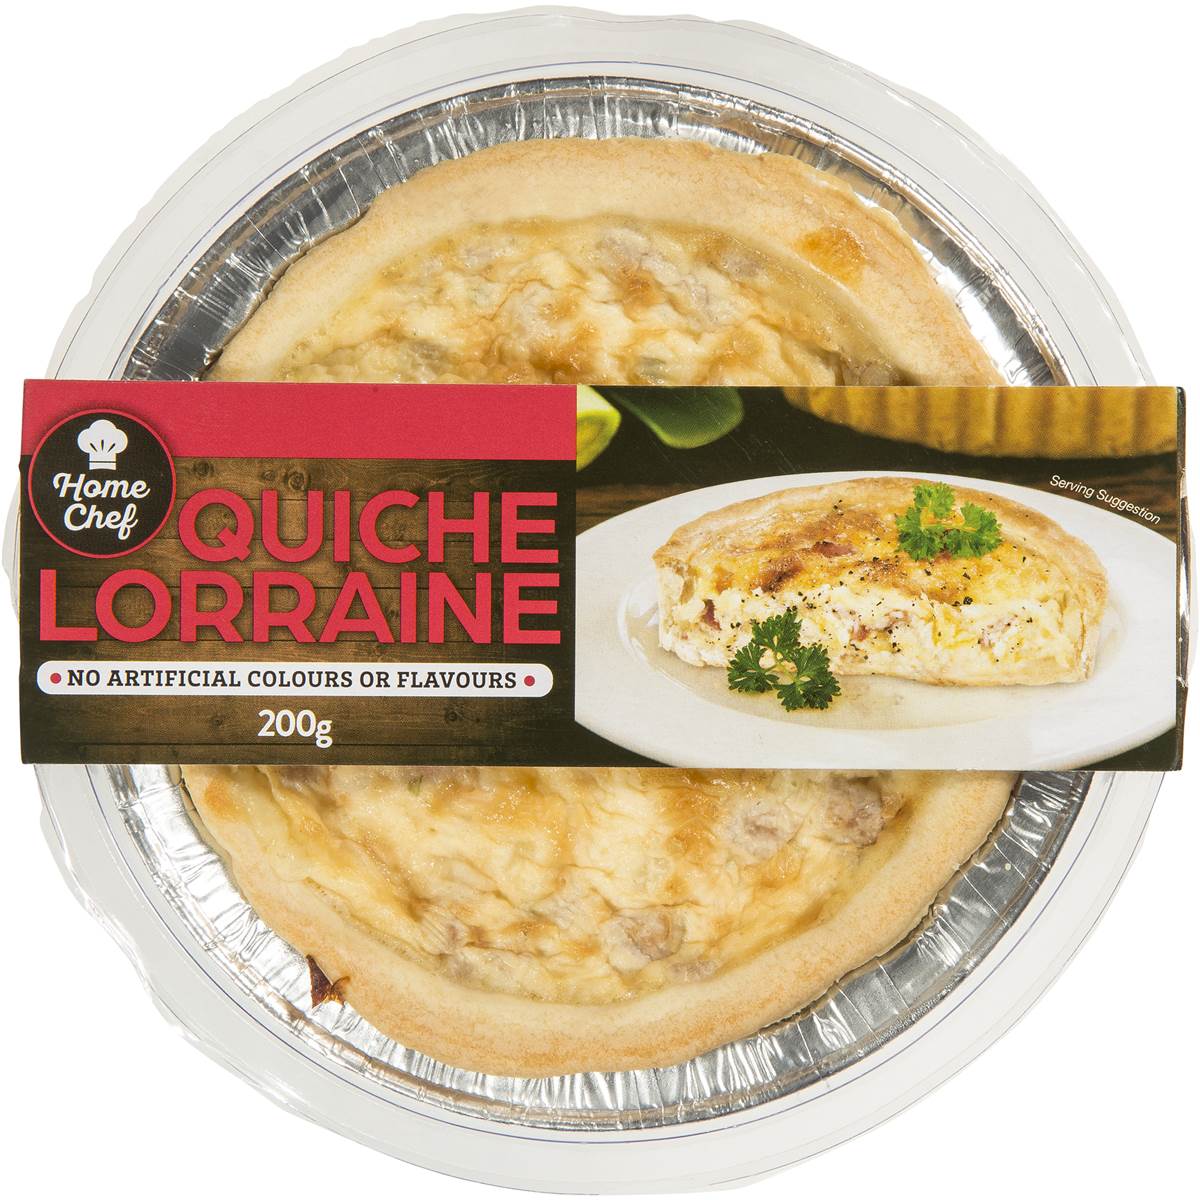 Calories in Home Chef Quiche Lorraine Chilled Meal